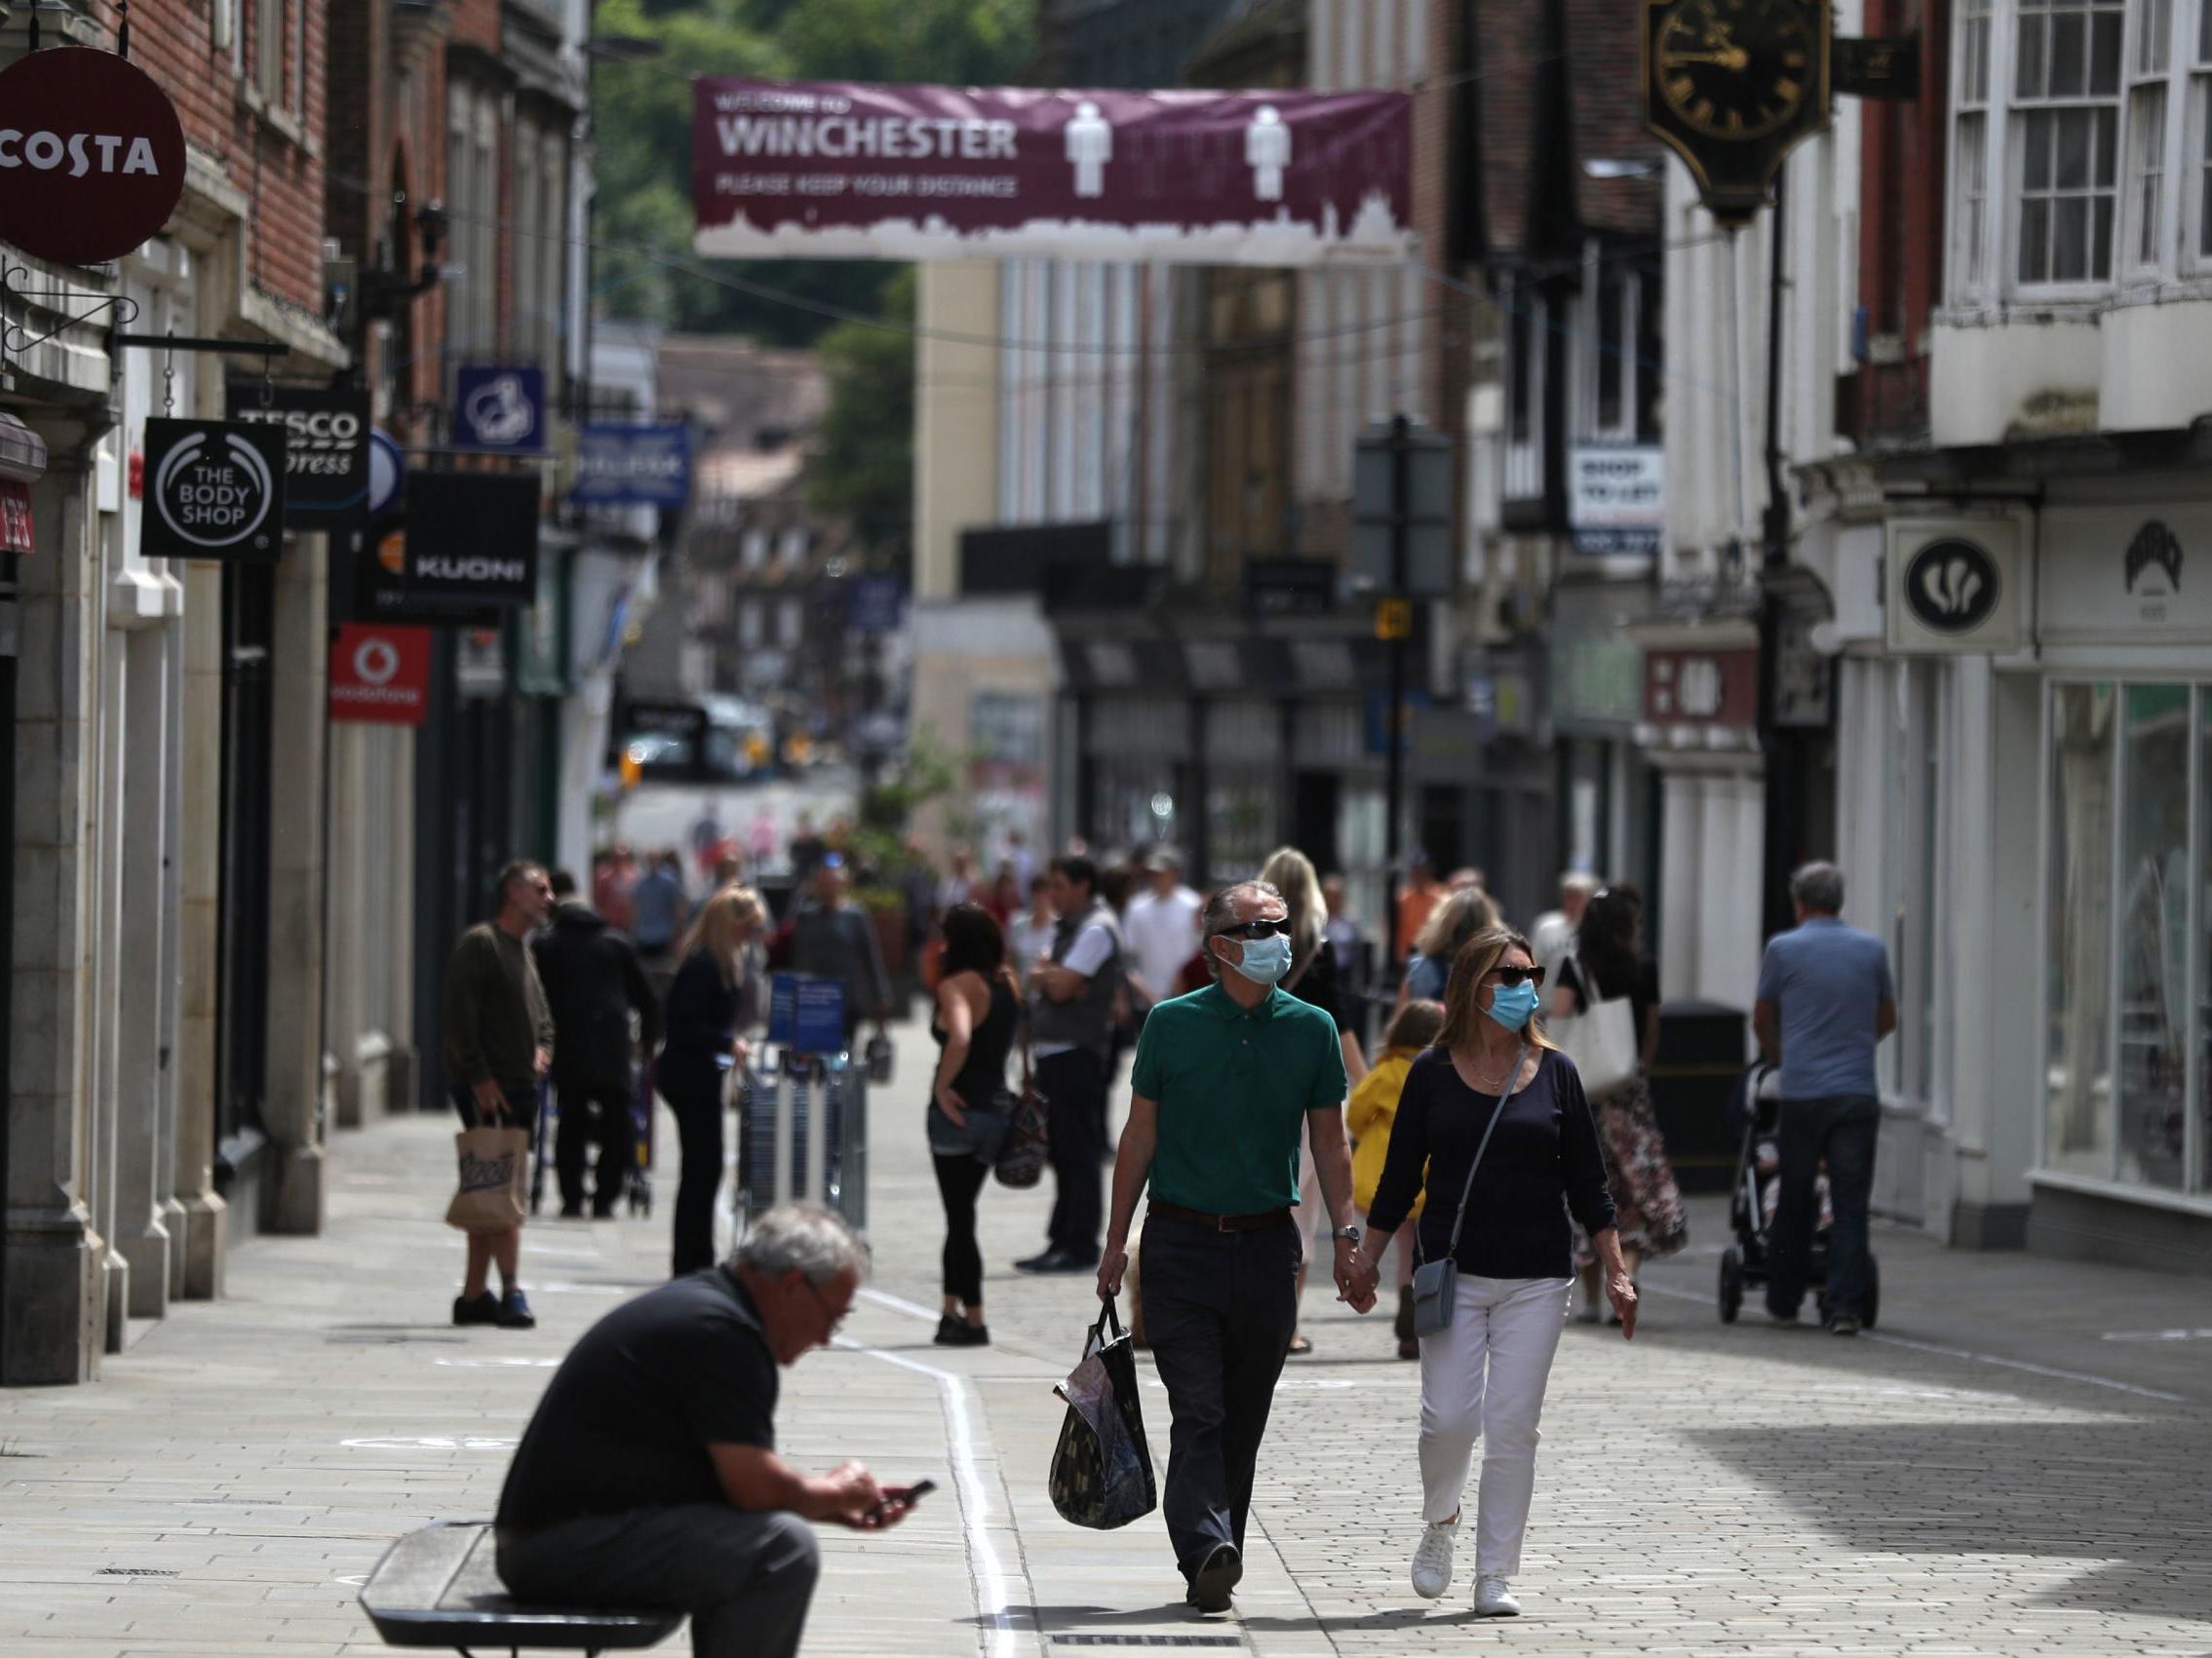 espite social distancing and queues, many shoppers braved the high street in June, but there may be problems ahead